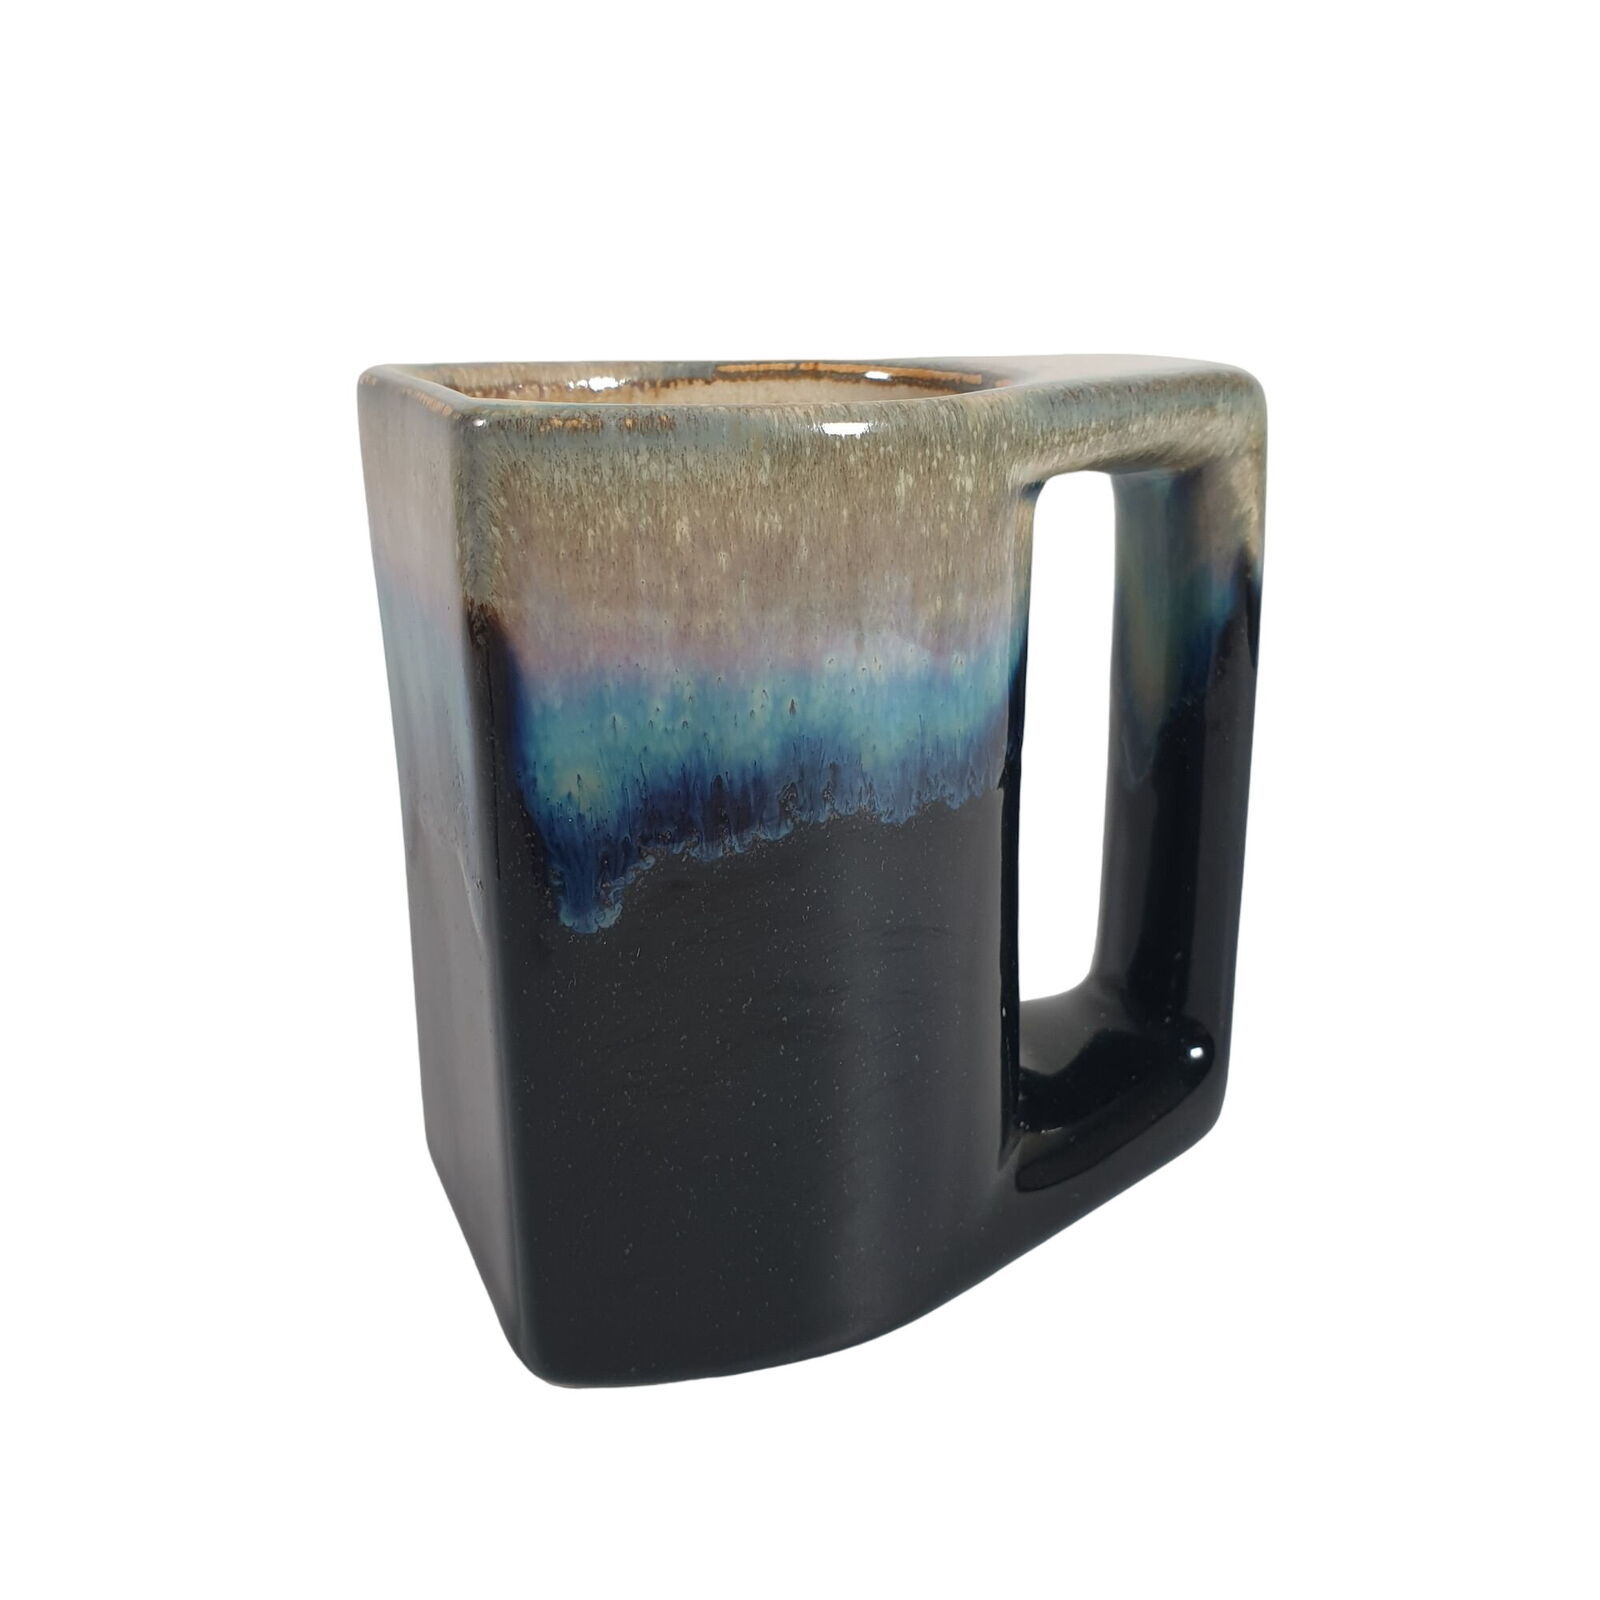 Primary image for C C Ceramics Mexico Blue Glazed Flat Side Coffee Mug Cup Collectable Ceramic Tea